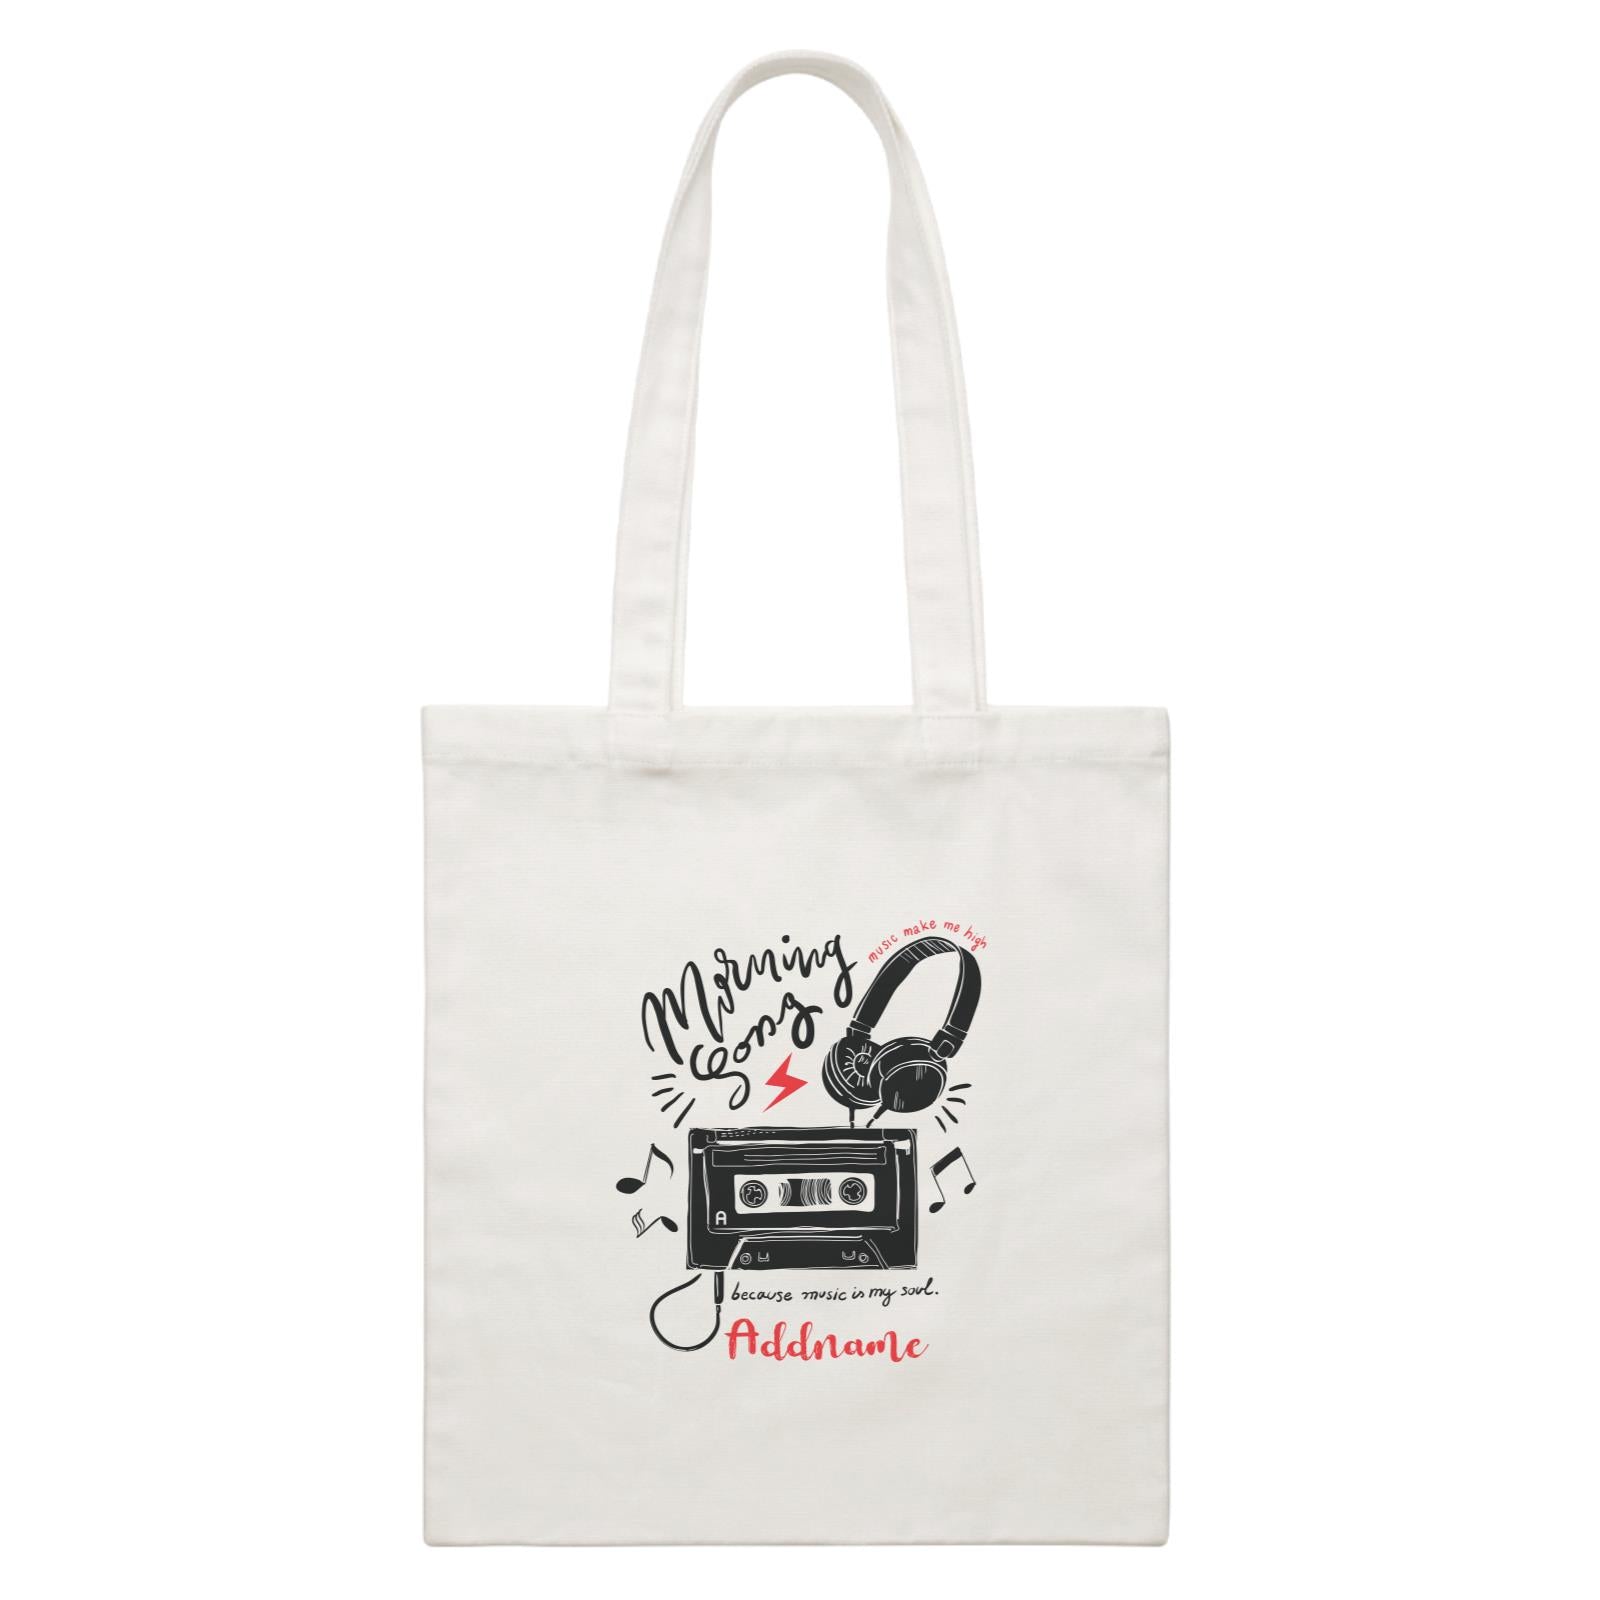 Vintage Gadgets Morning Songs Because Music My Souls Cassette Headphones With Addname White Canvas Bag